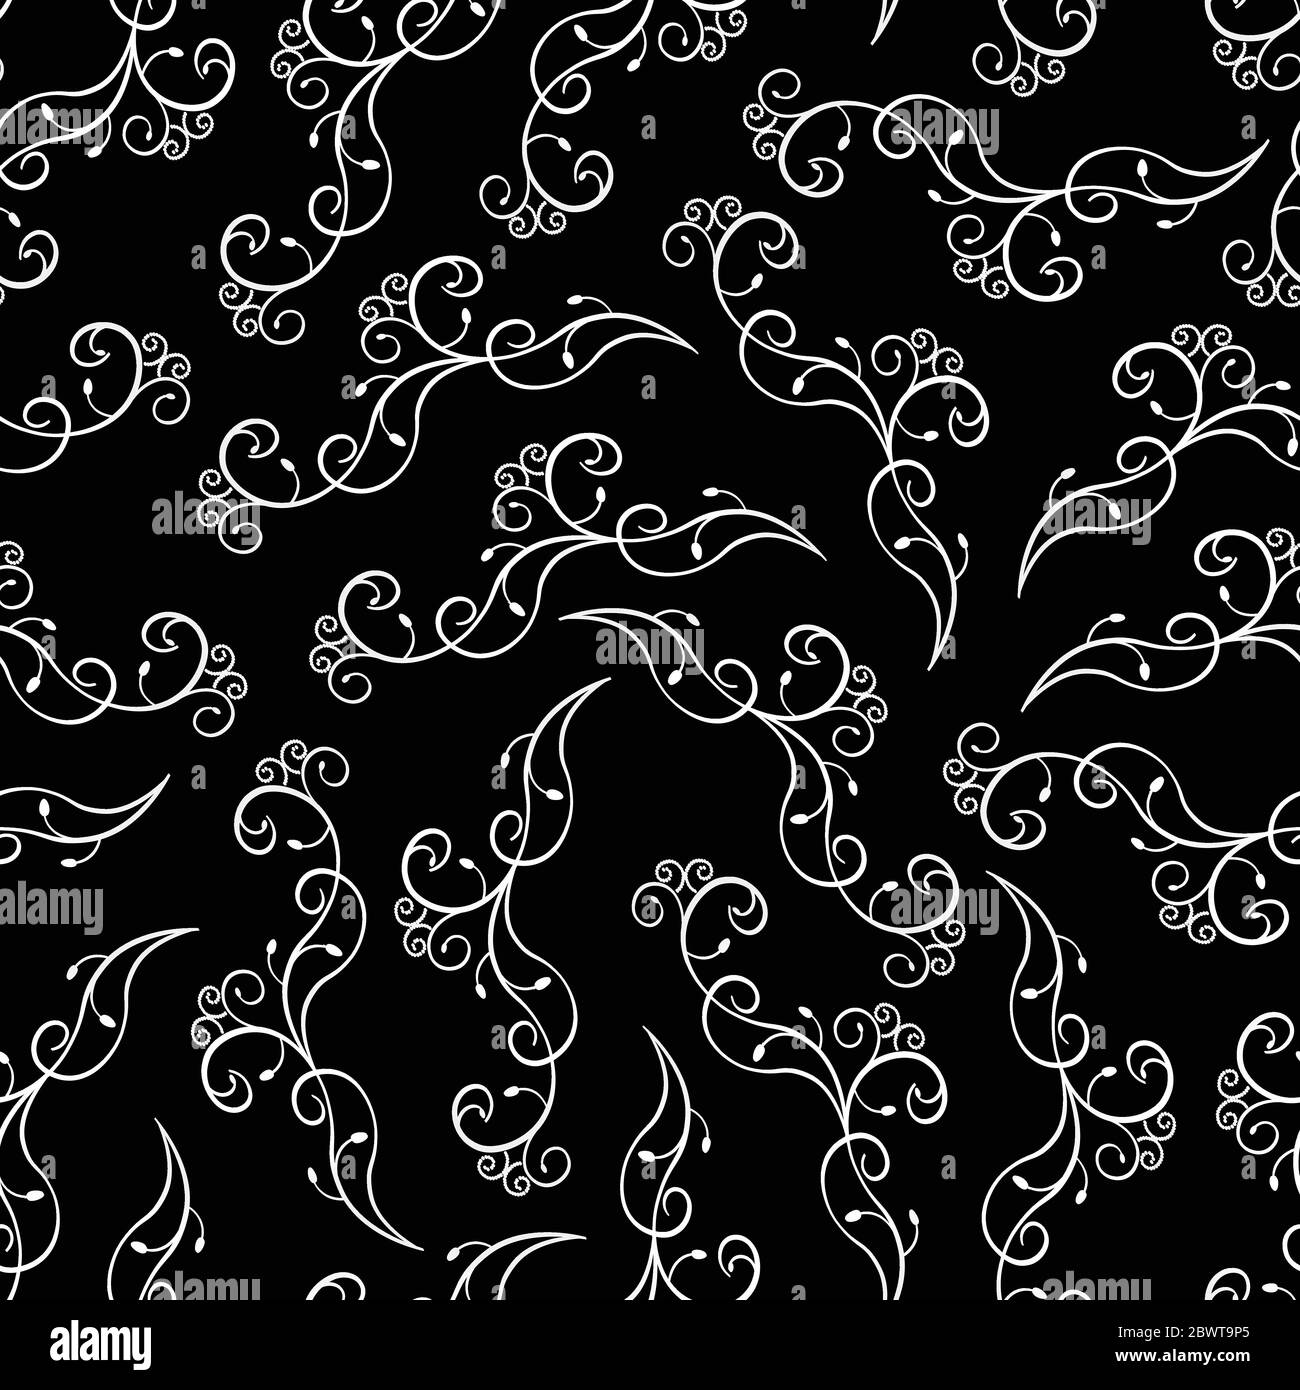 Floral black and white seamless pattern. Stock Vector